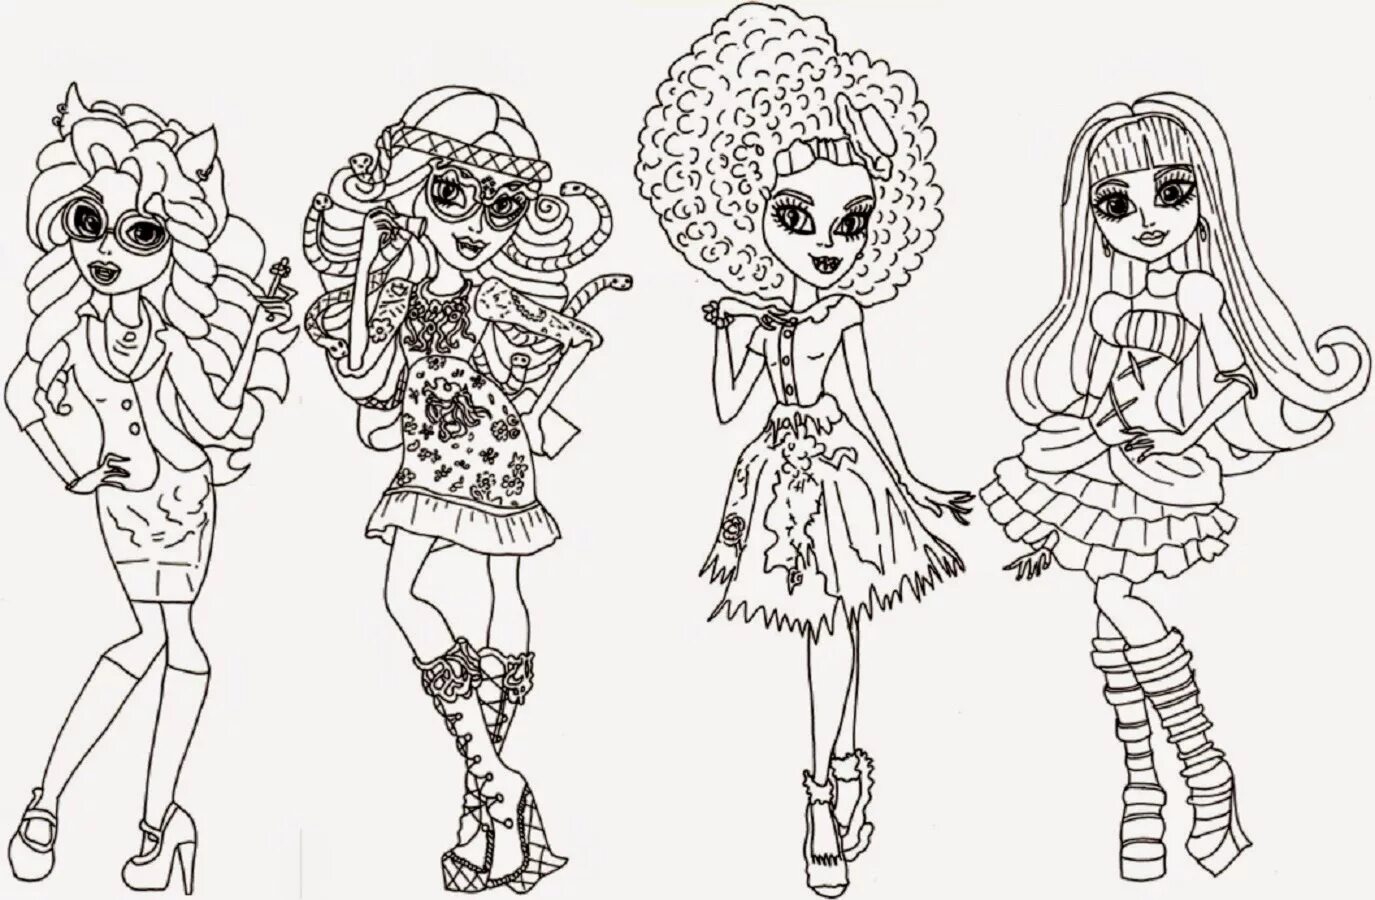 Monster high dolls fashion coloring